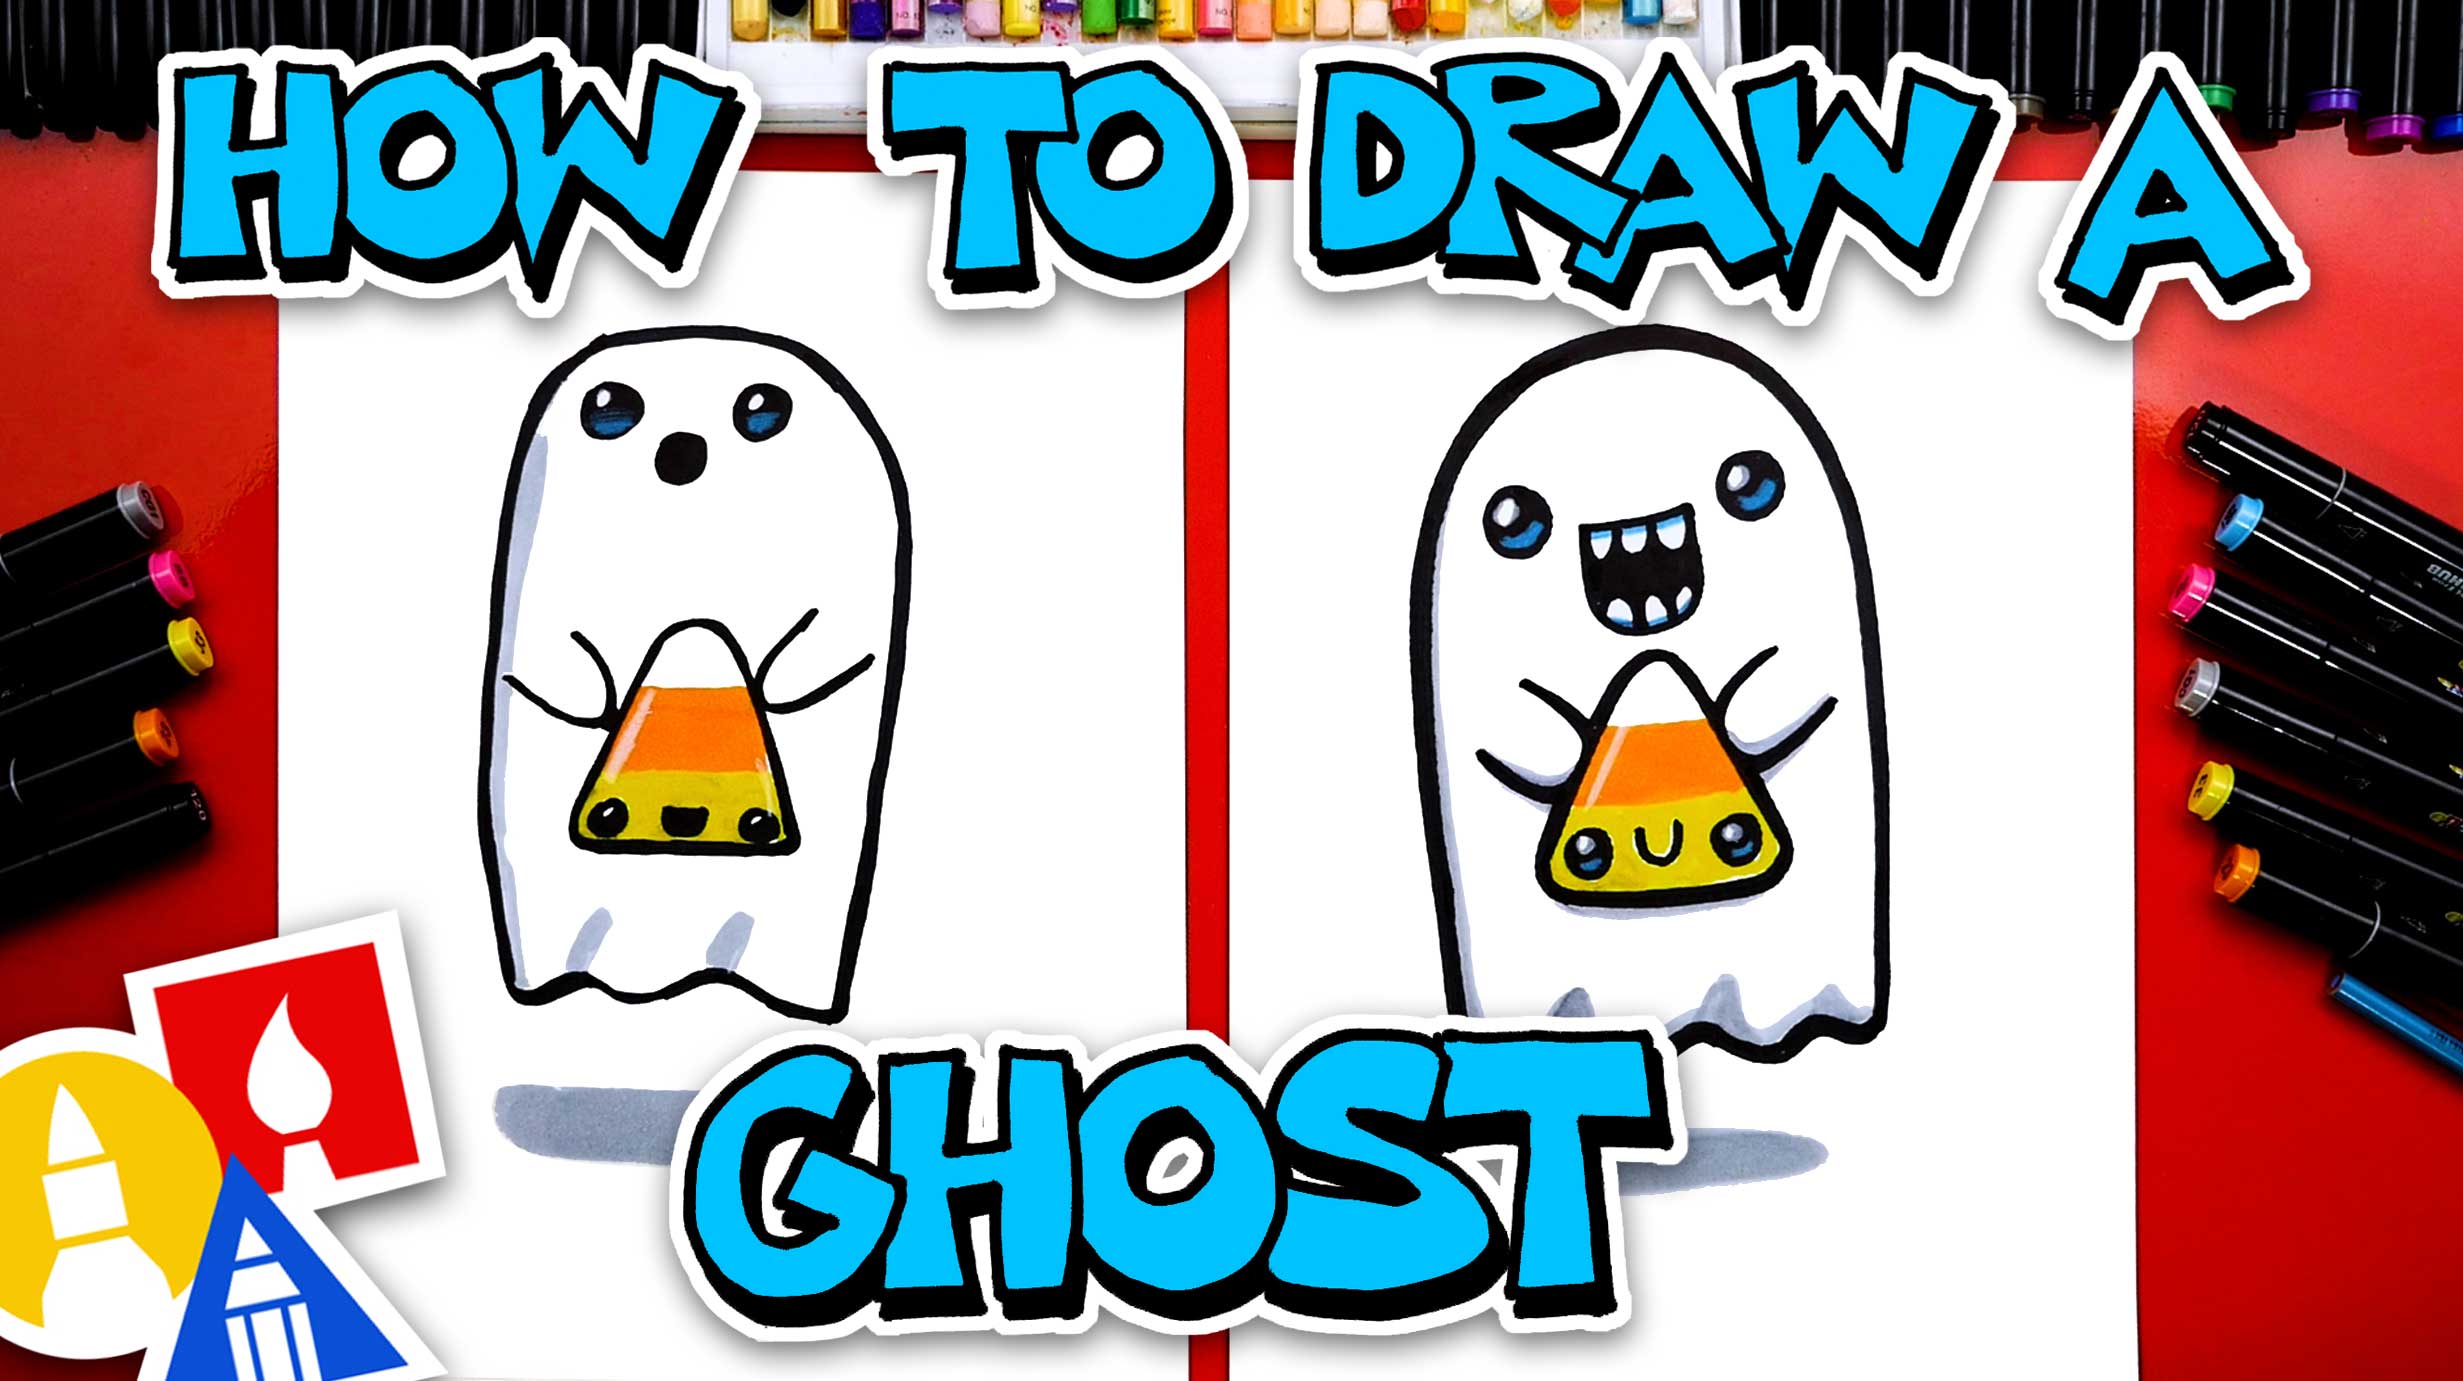 How To Draw A Ghost Holding A Candy Corn - Art For Kids Hub 